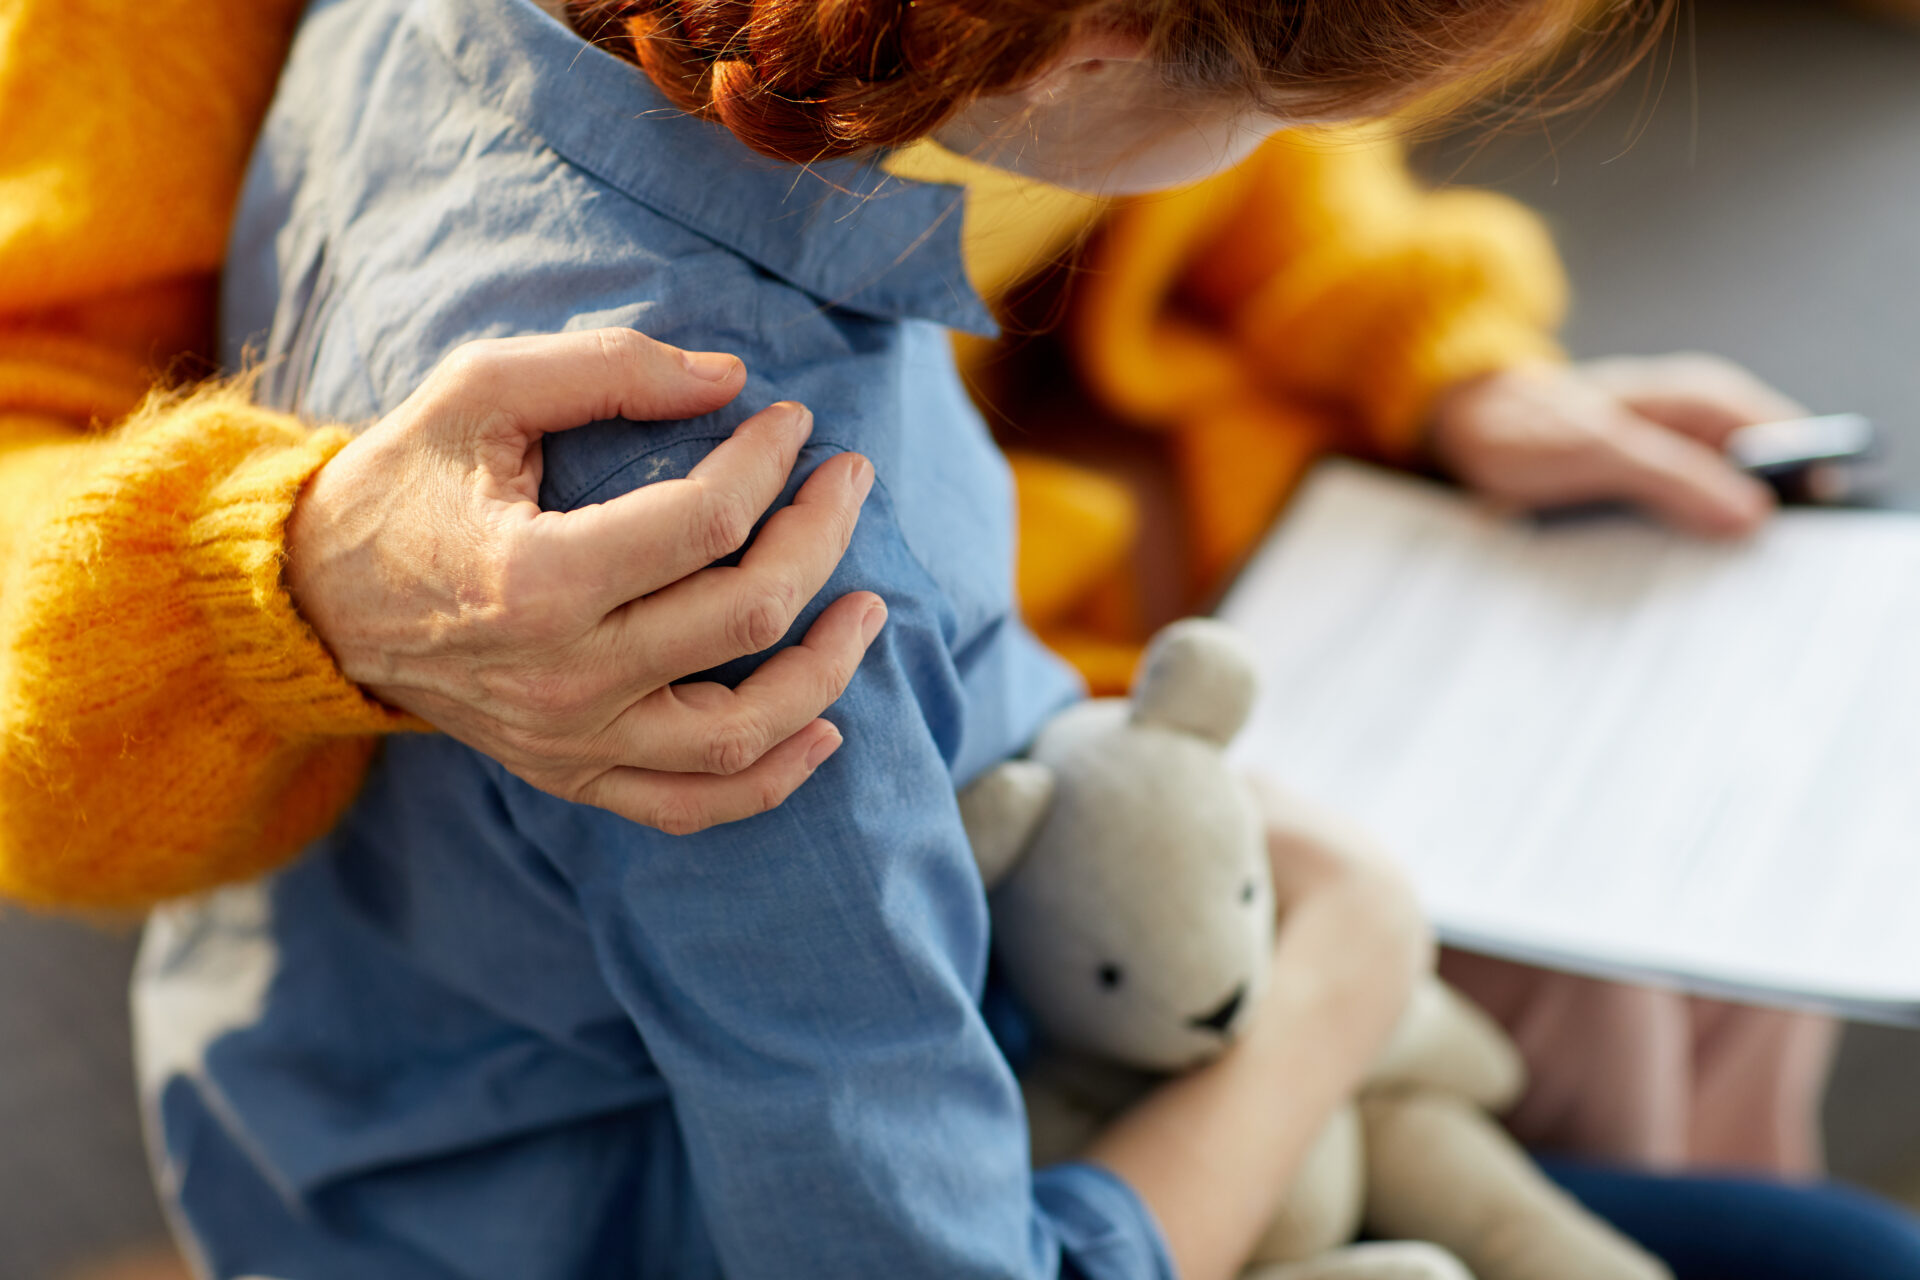 Discussion: Parental Interventions For Children’s Mental Health